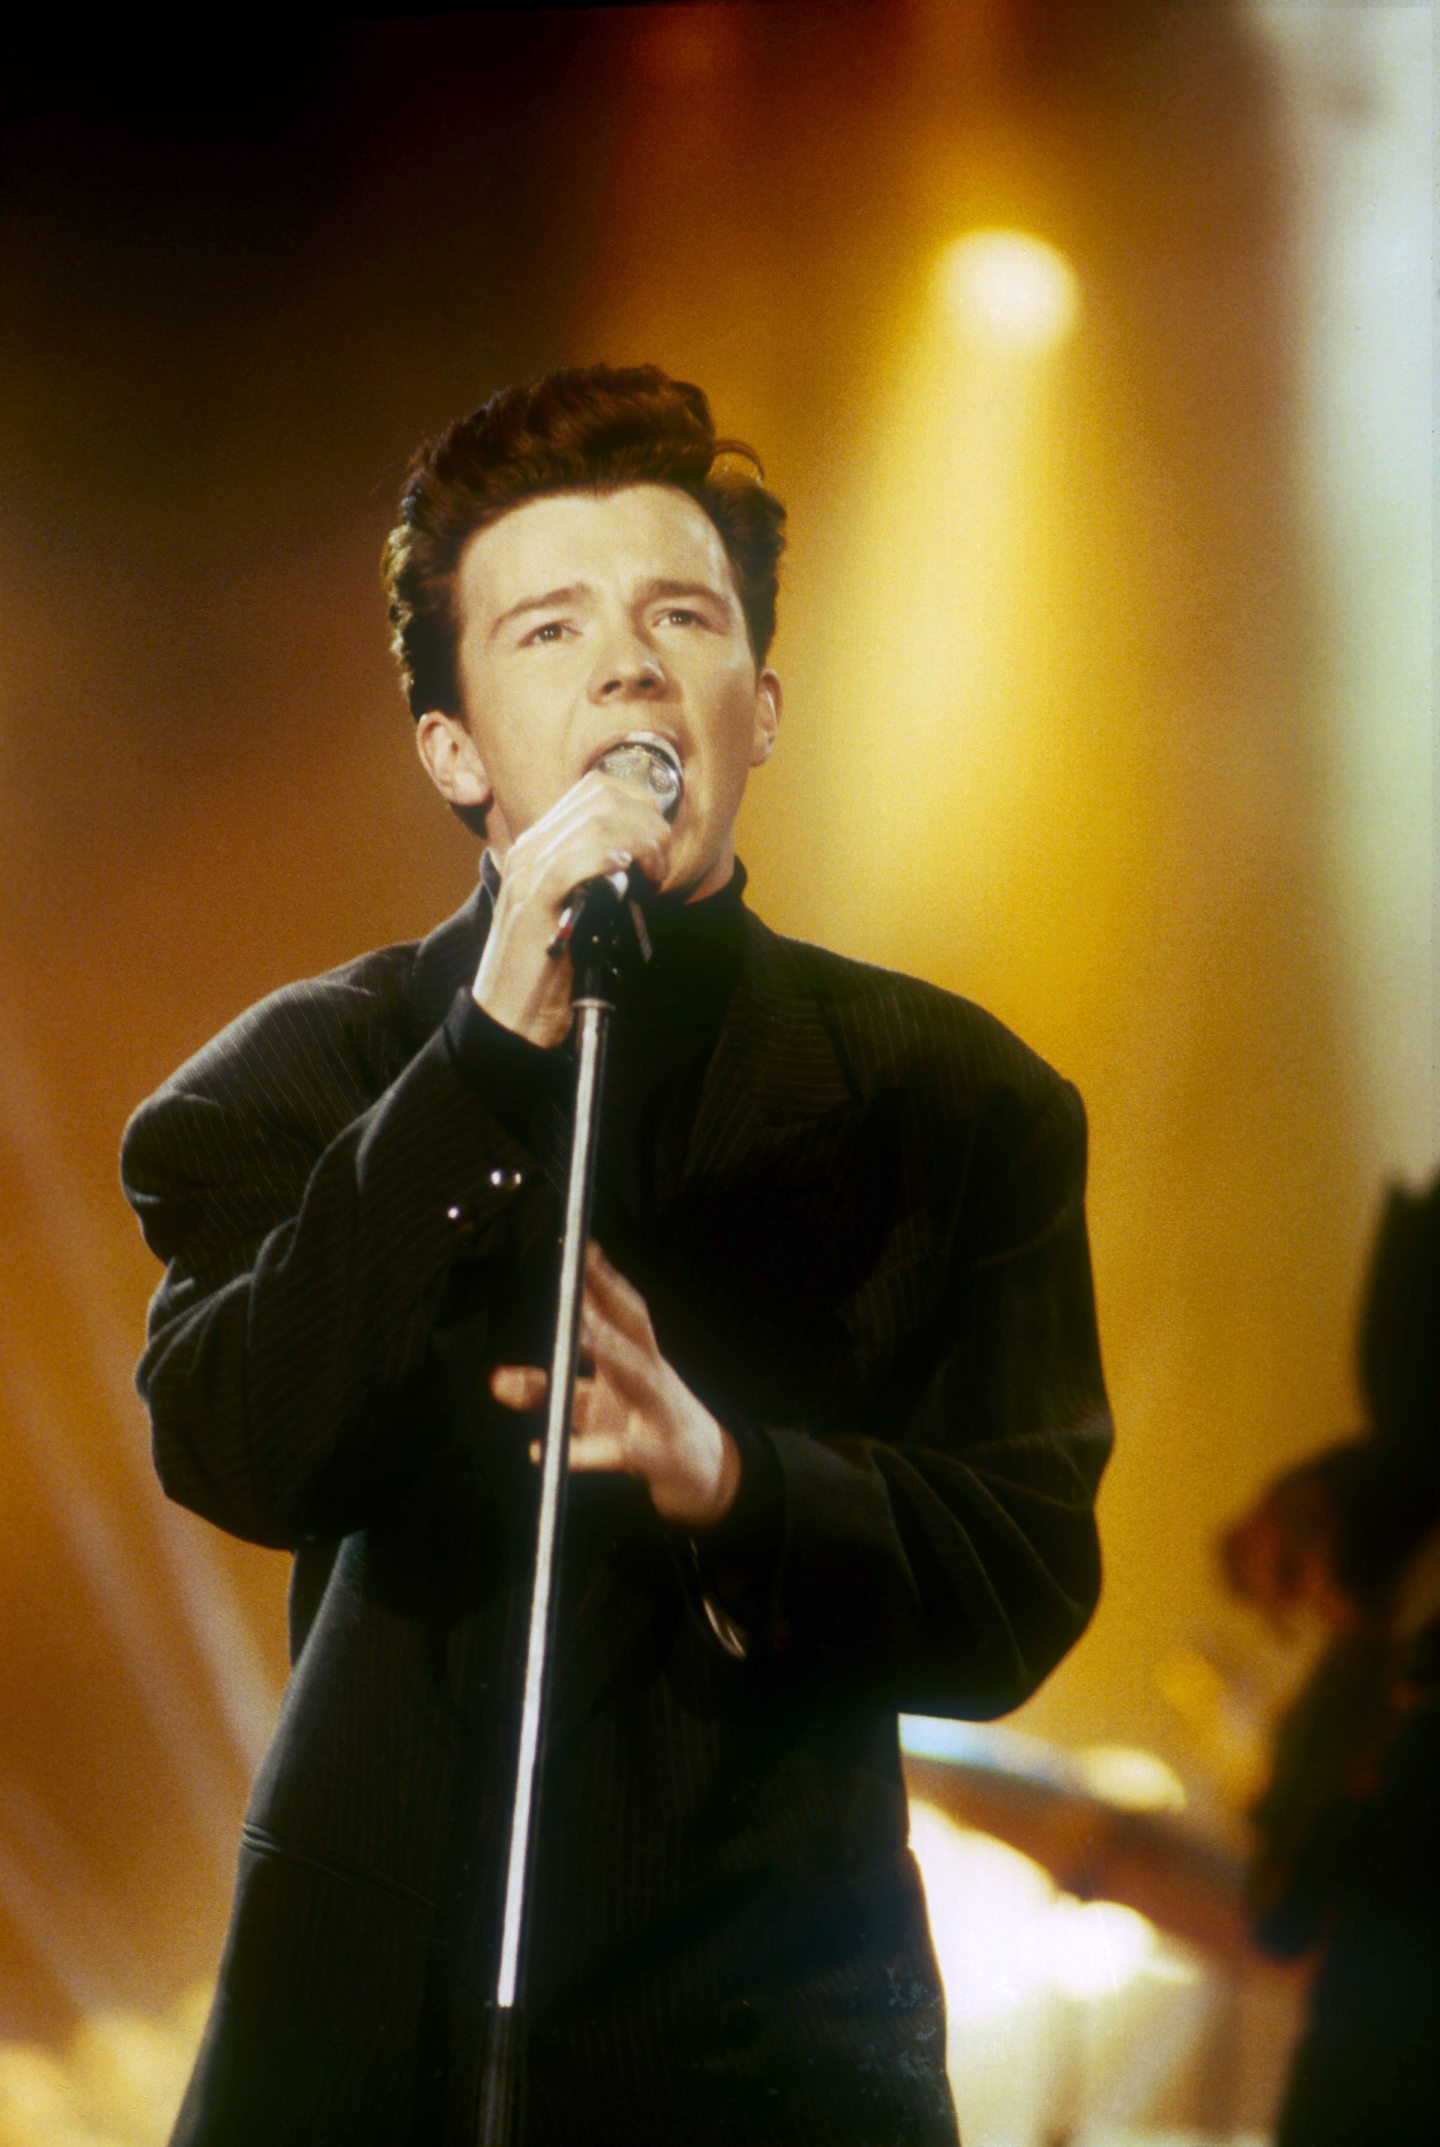 Rick Astley on stage in 1987 when he was riding high in the charts. Image: Shutterstock.